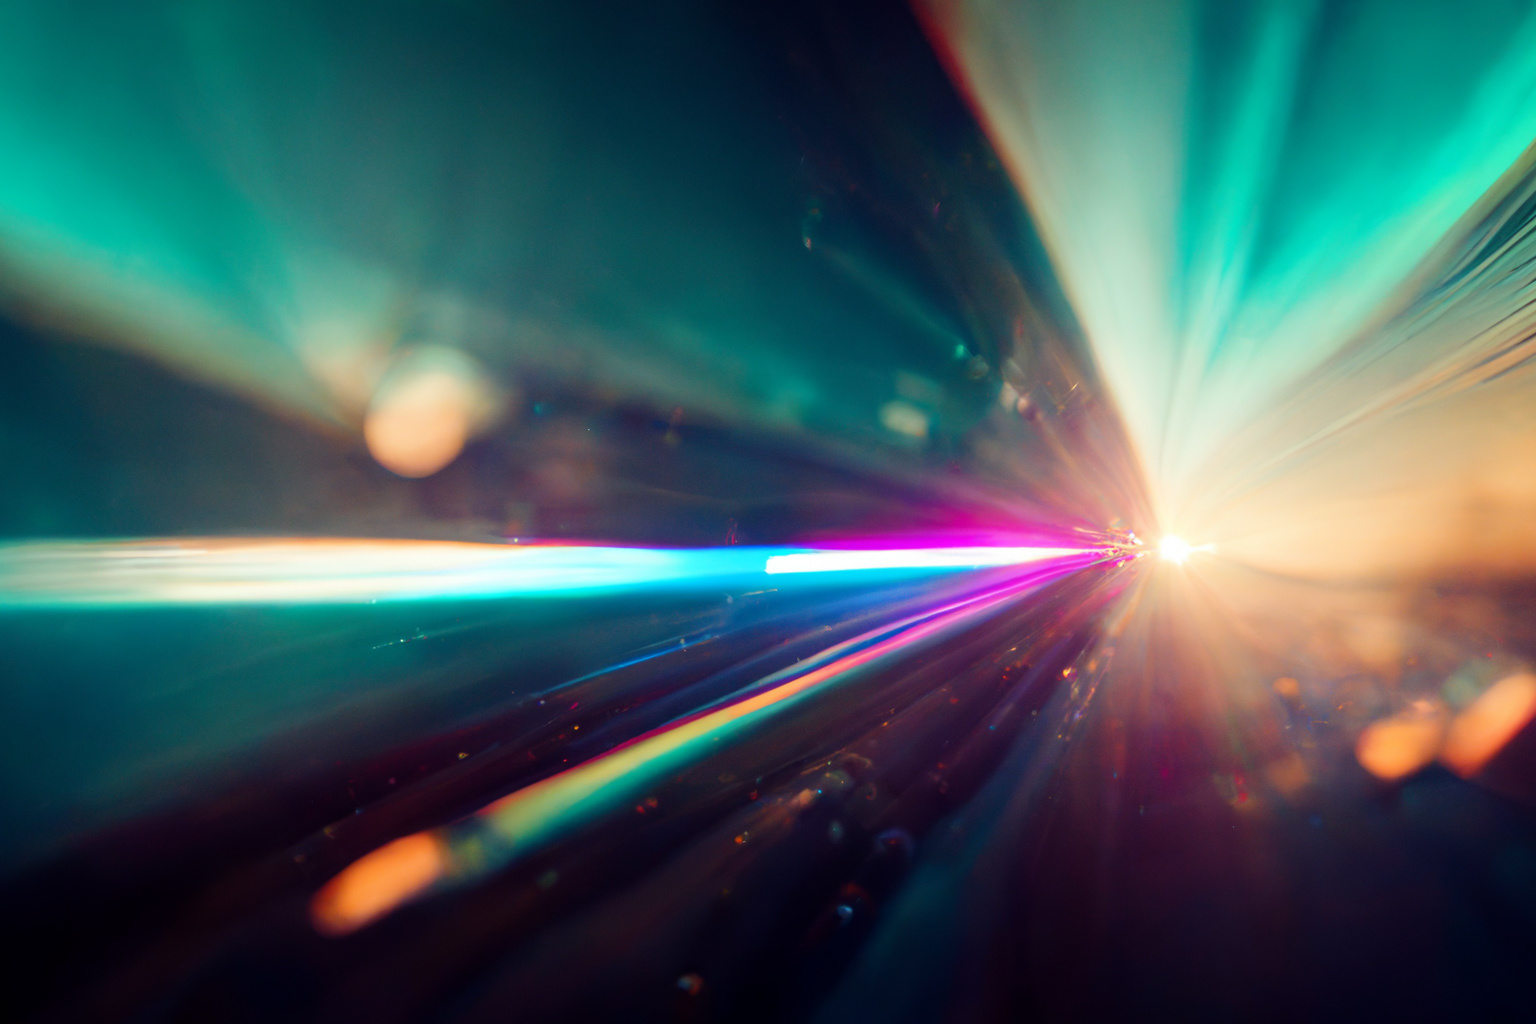 Abstract lens flare image generated with AI